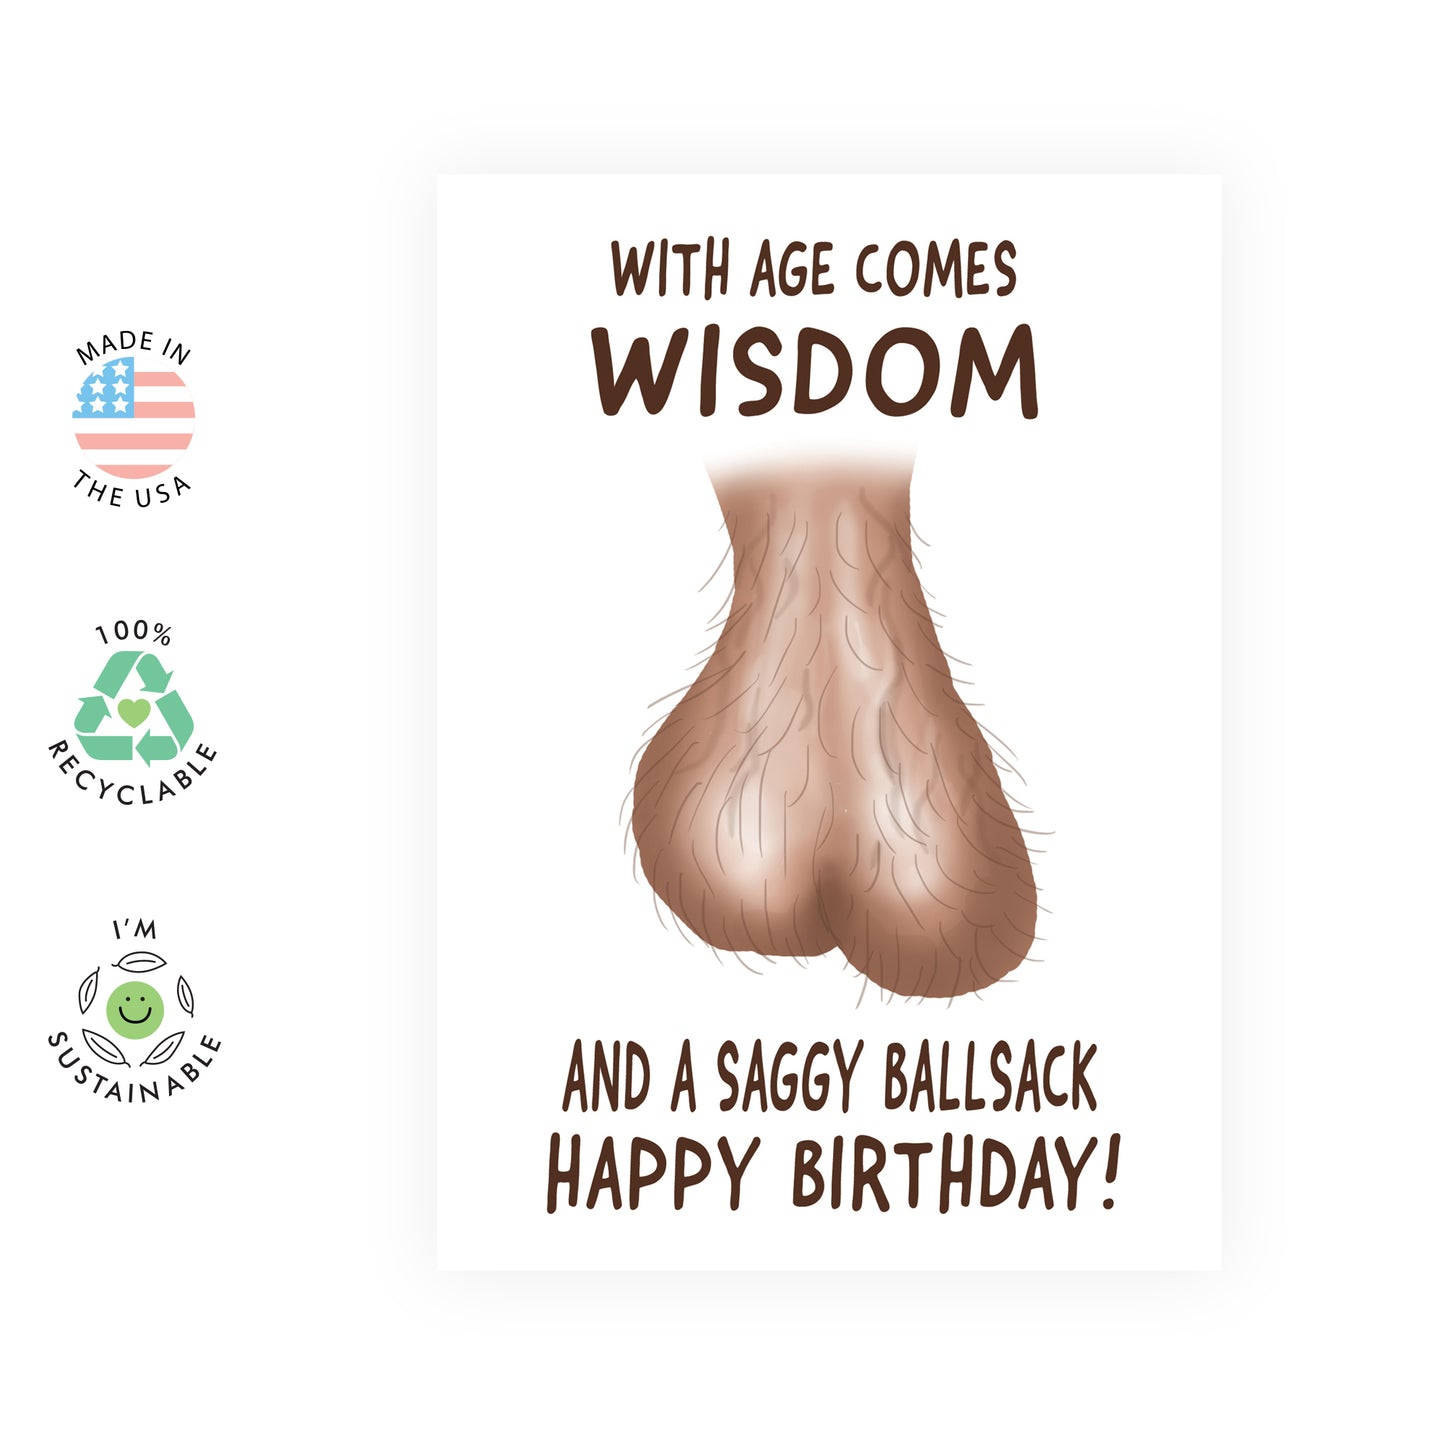 Funny Birthday Card - With Age Comes Wisdom - For Men Him